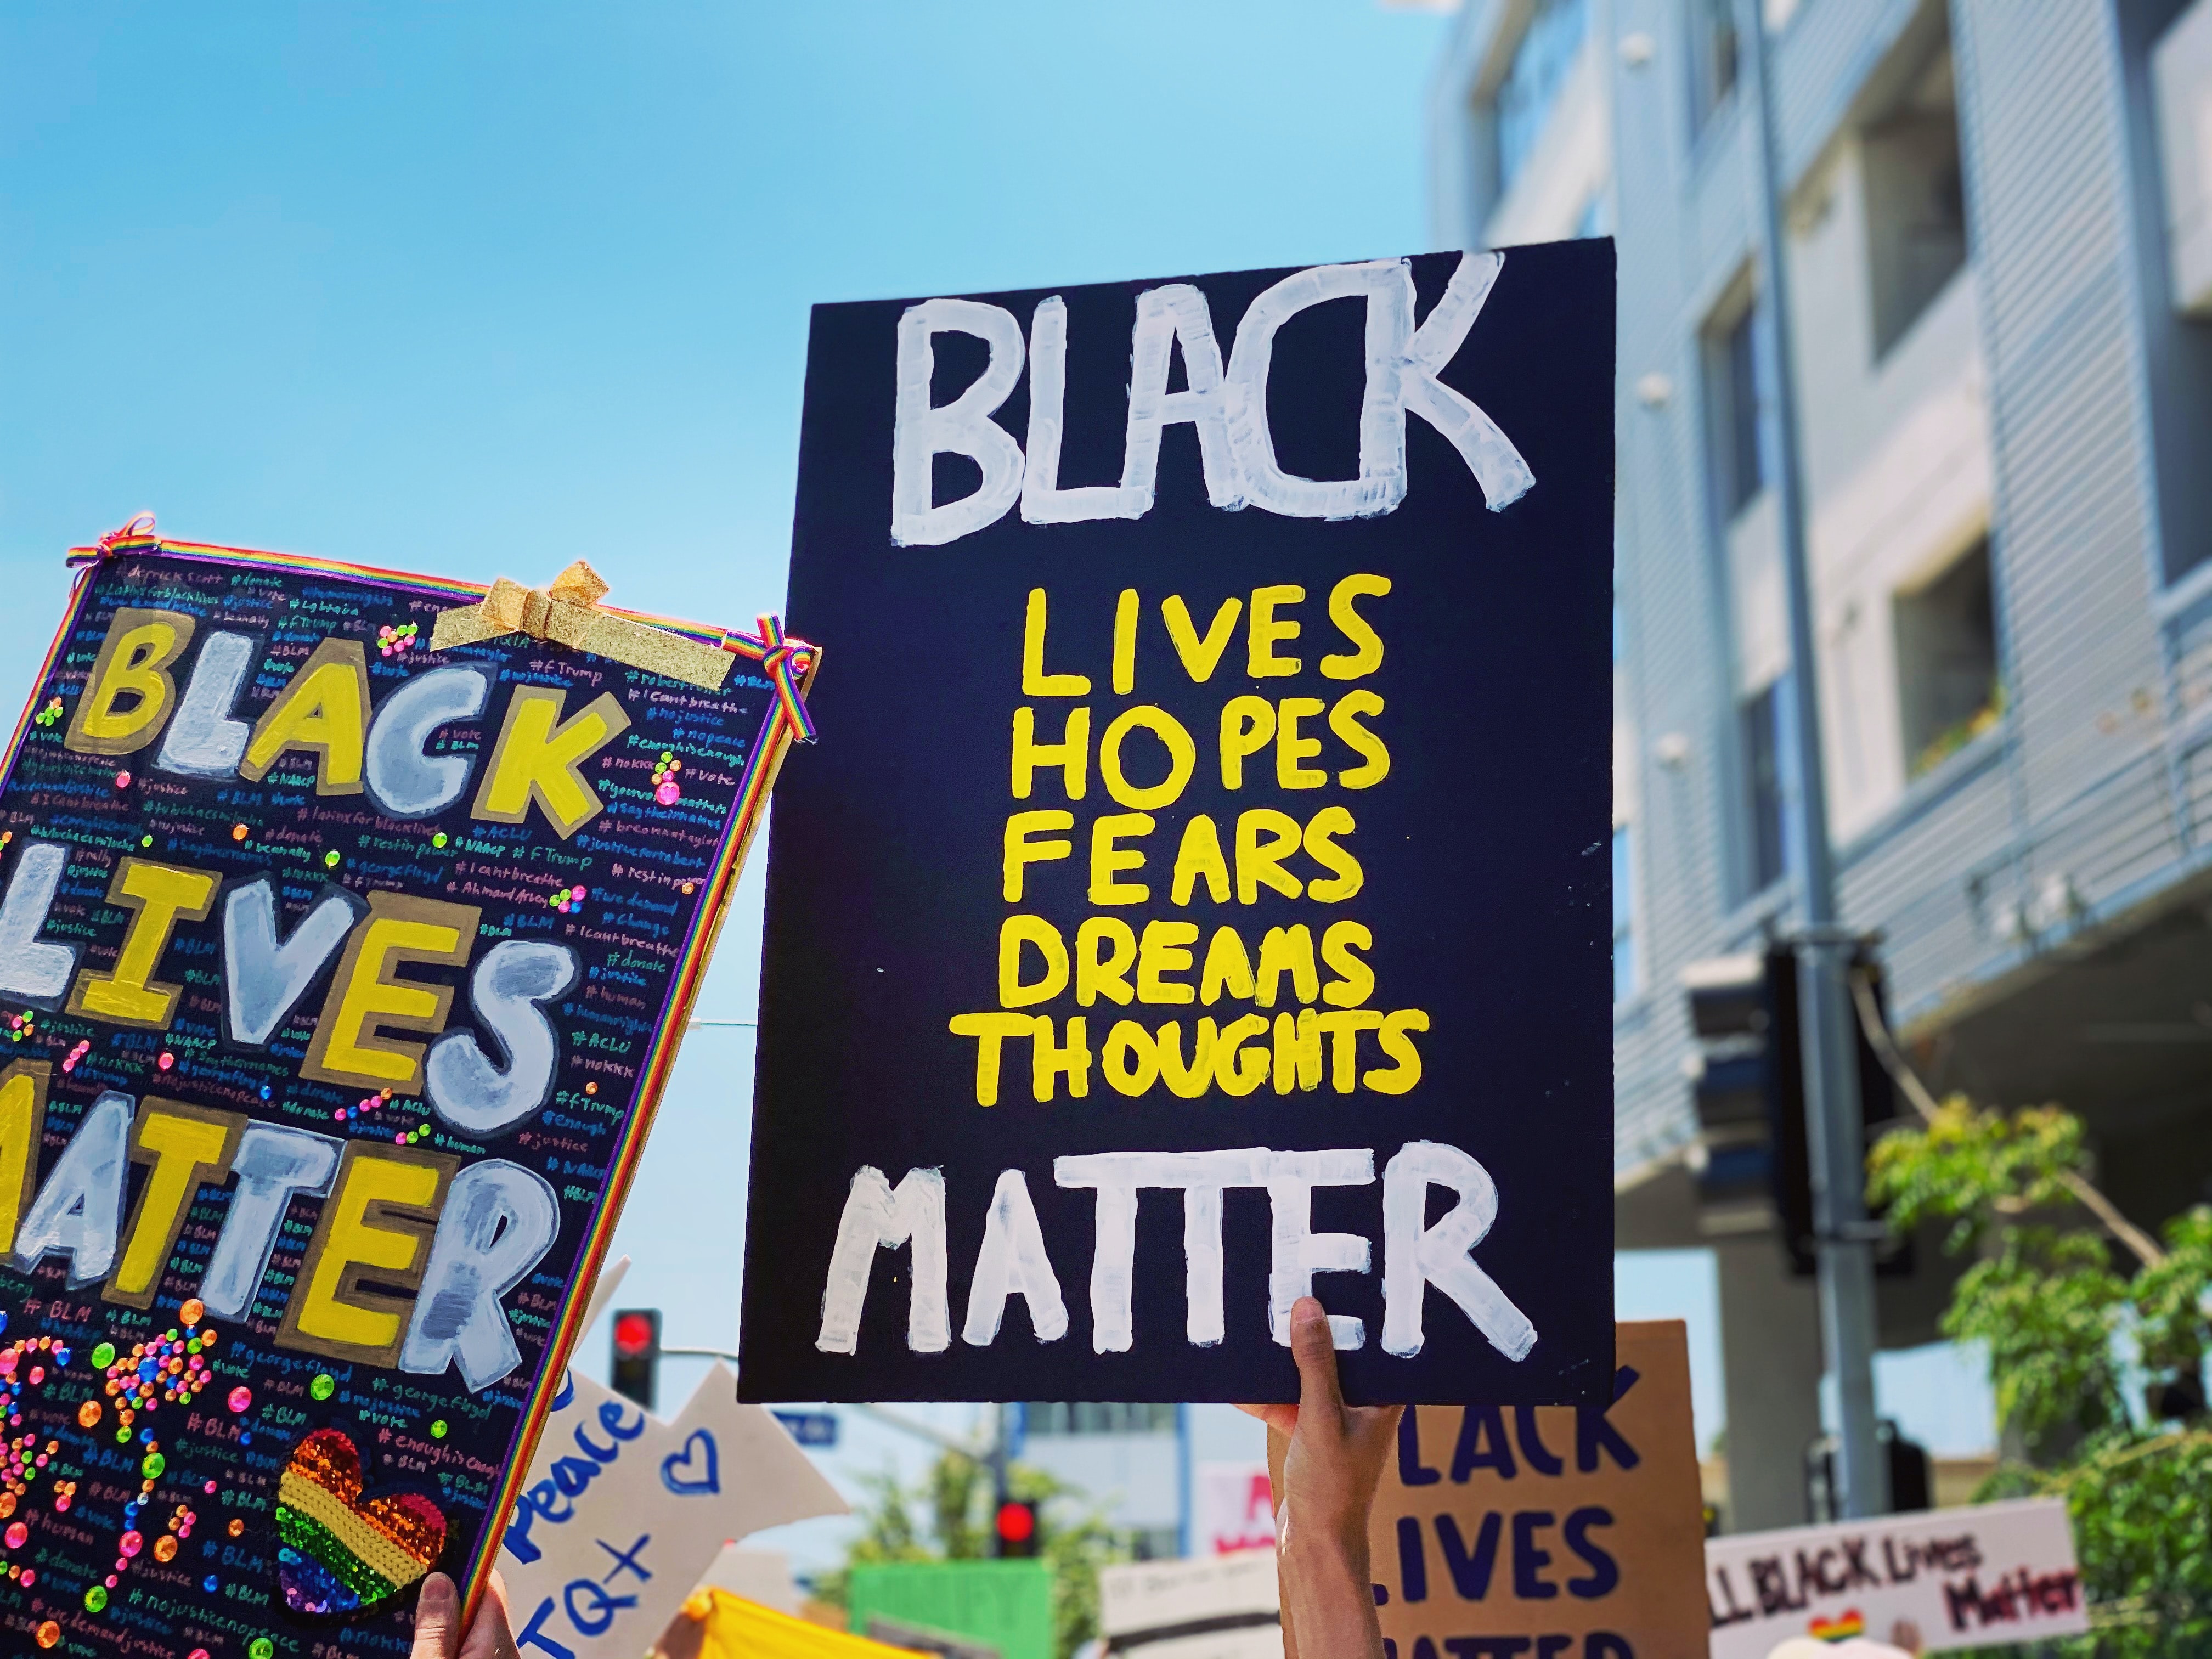 A black sign being held aloft. It reads: Black Lives, Hopes, Fears, Dreams, Thoughts Matter." Next to this sign is another one that reads "Black Lives Matter"